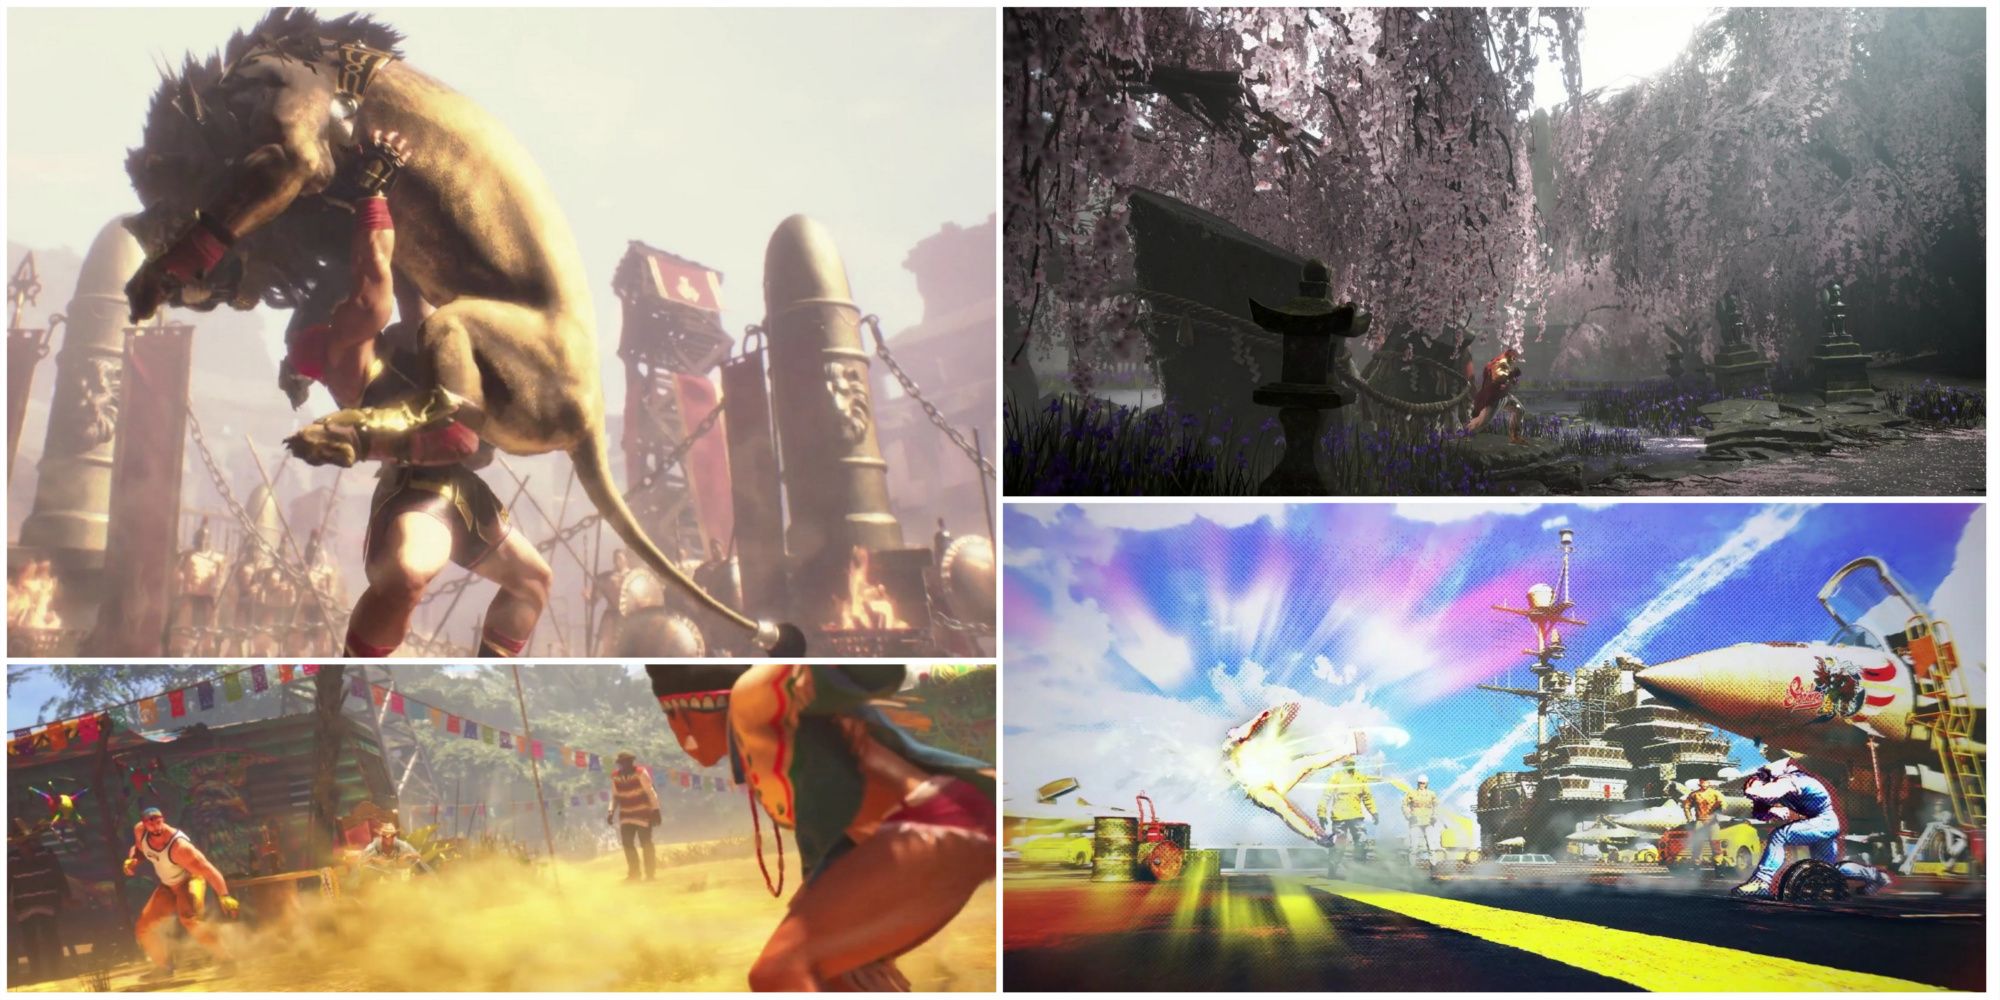 Travel the globe with the best locations in the Street Fighter